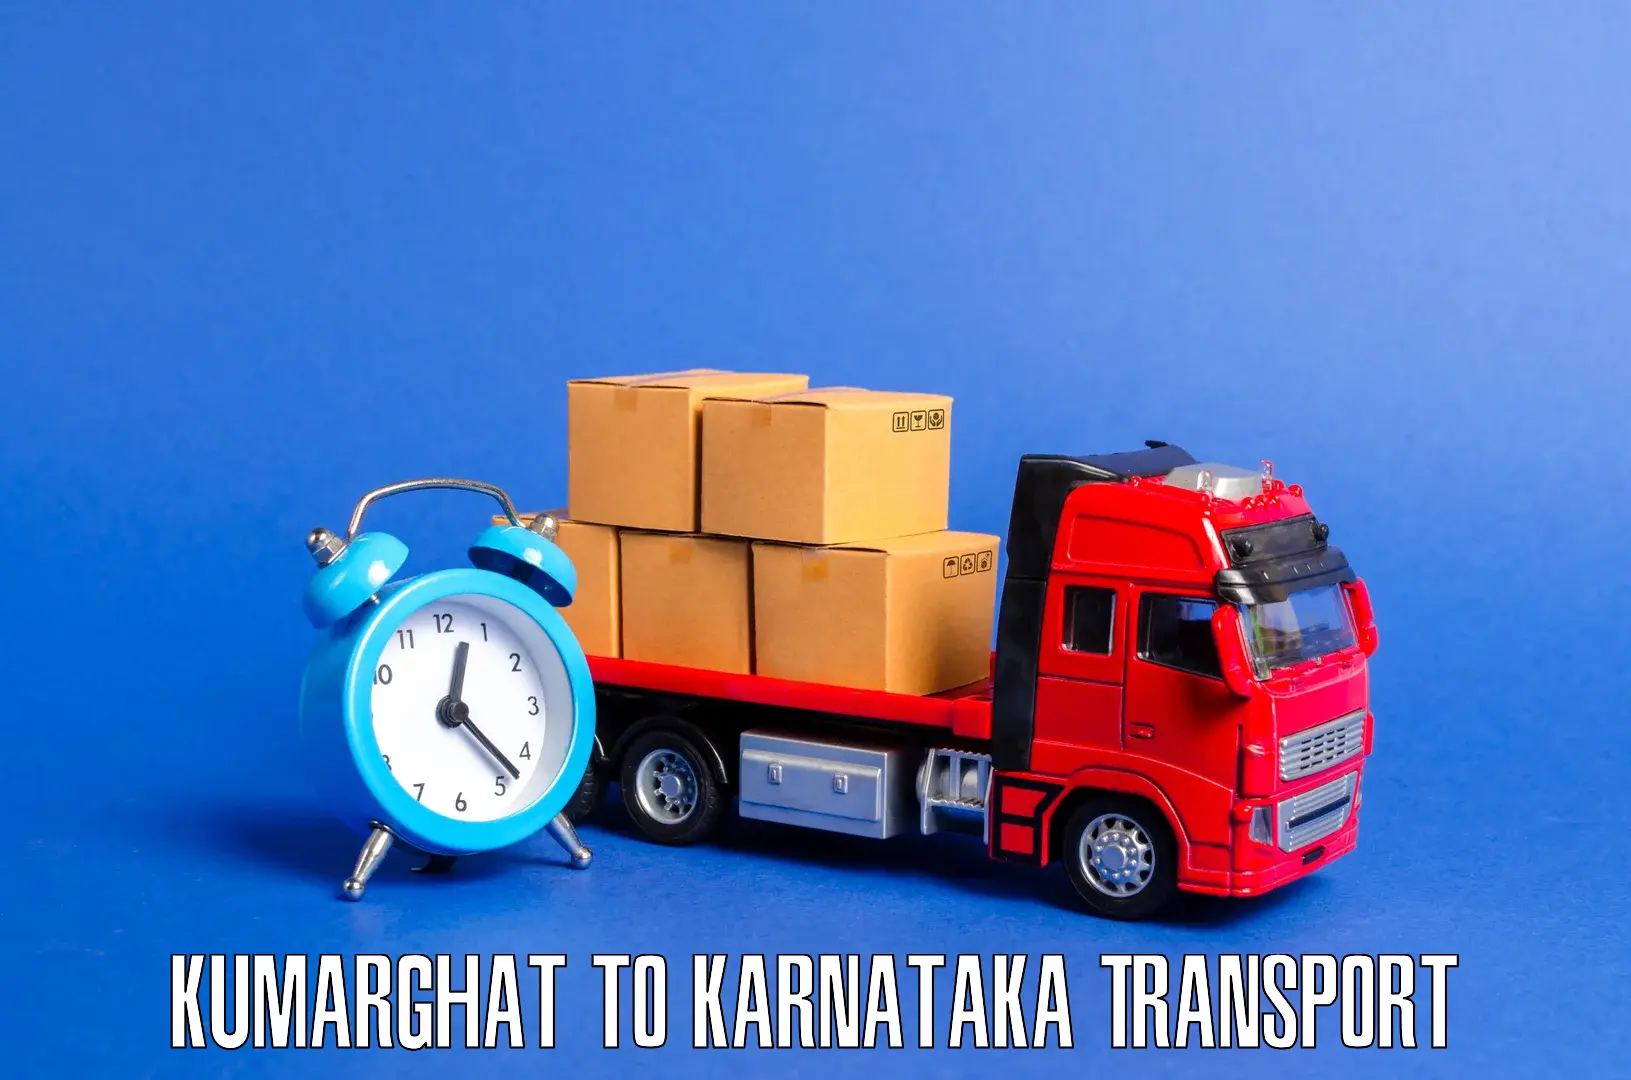 Express transport services in Kumarghat to Kollegal